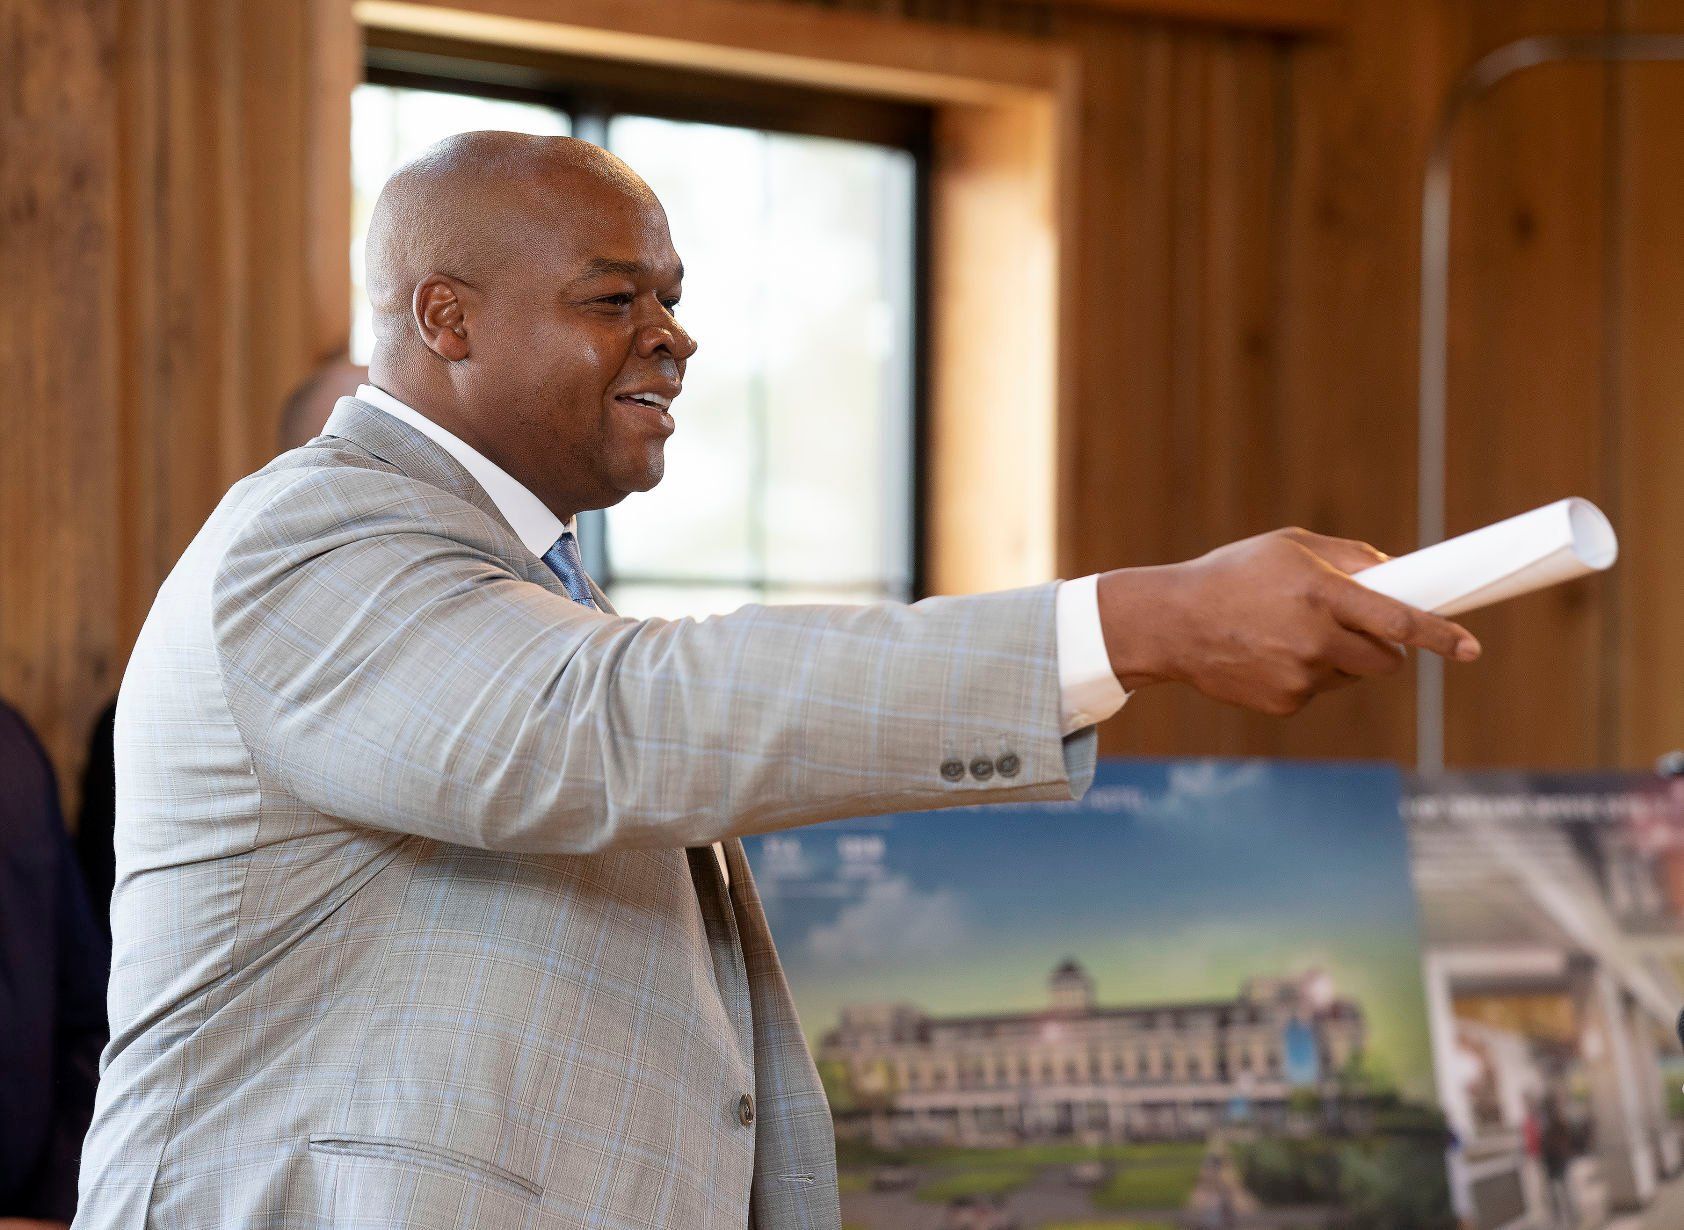 Baseball Hall of Famer Frank Thomas, CEO of Go the Distance Baseball, said the developers will keep the community and nearby farmers informed as the $80-million project moves forward.    PHOTO CREDIT: Stephen Gassman